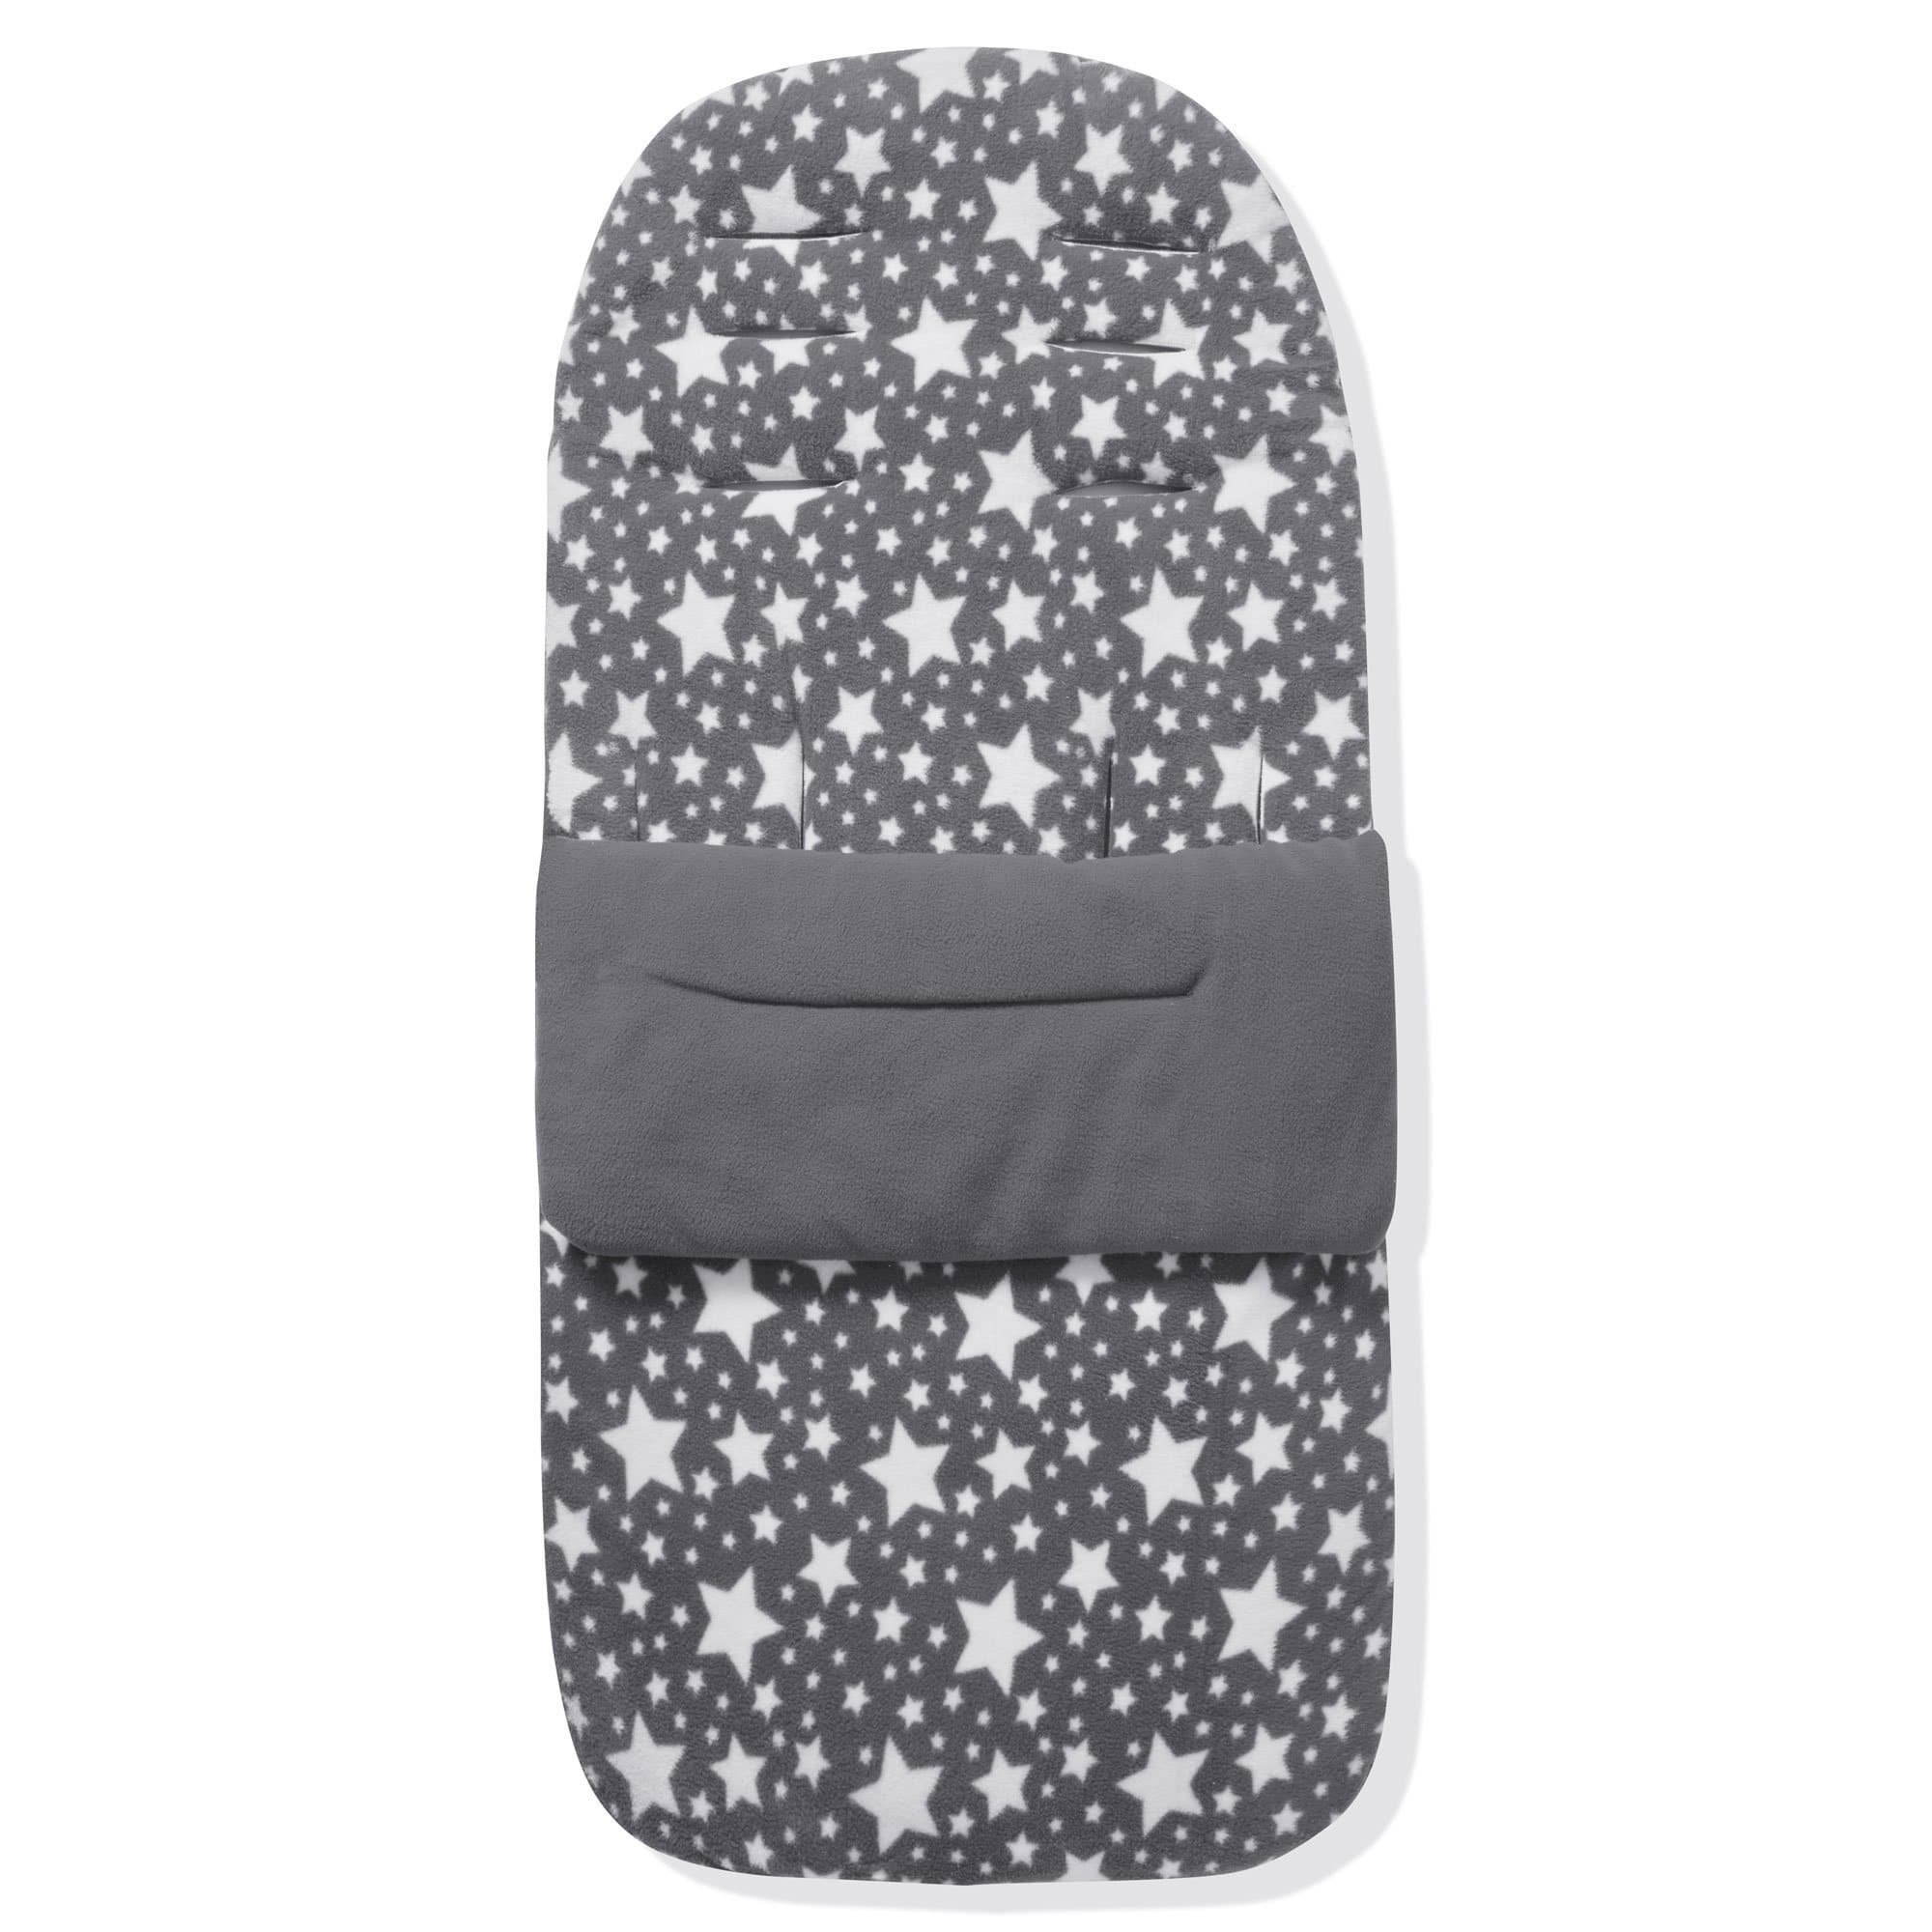 Fleece Footmuff / Cosy Toes Compatible with Diono - Grey Star / Fits All Models | For Your Little One